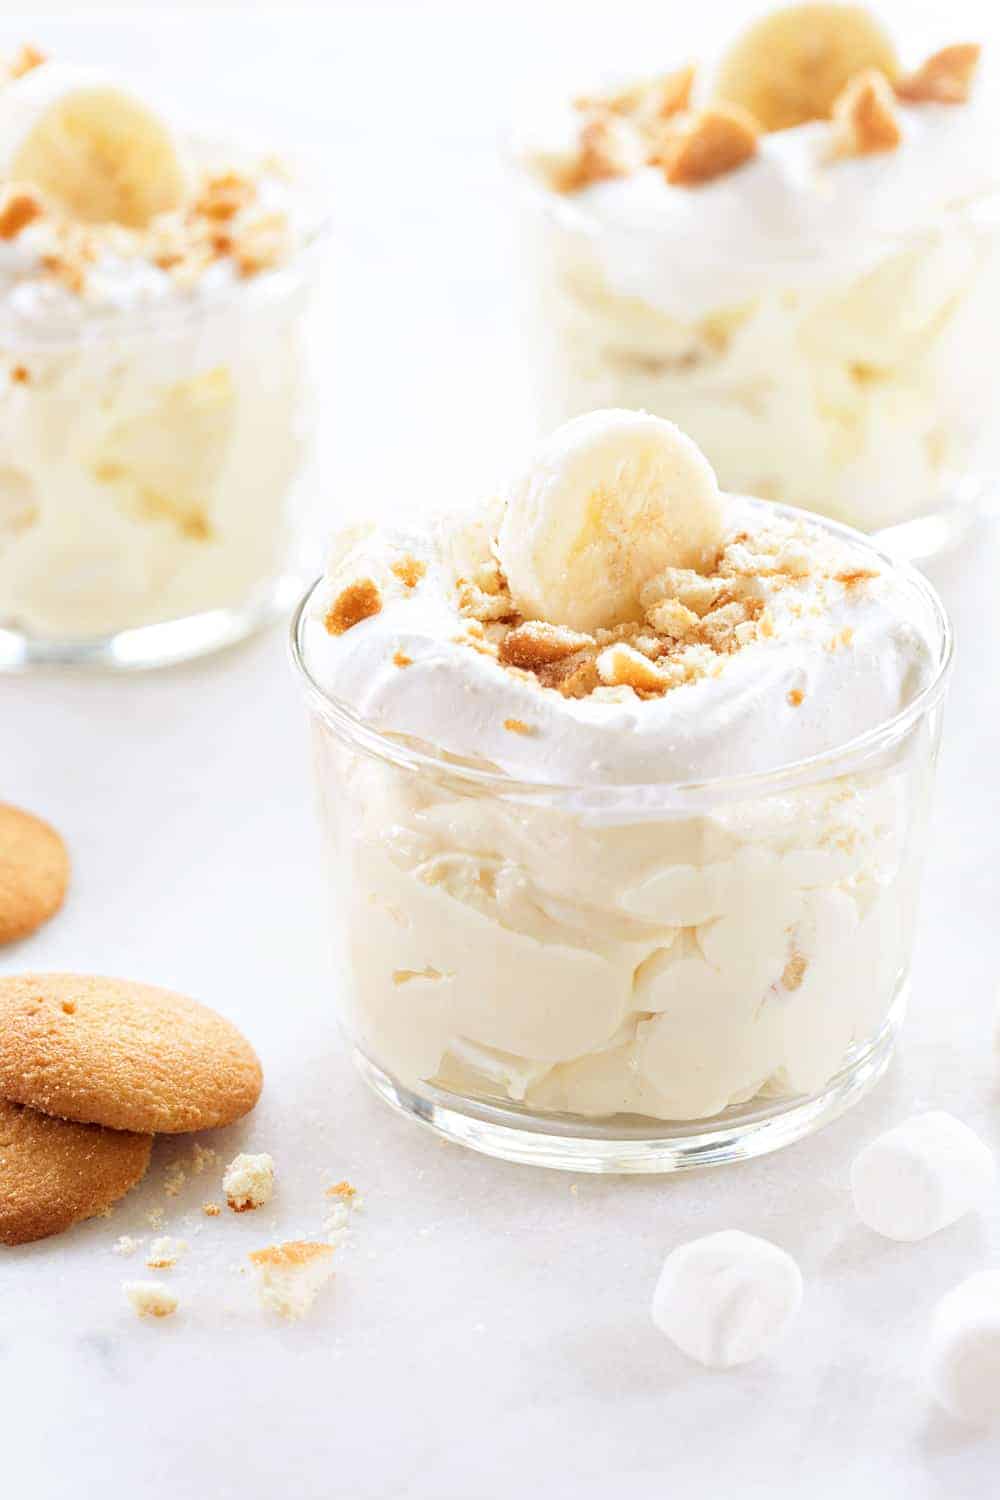 Banana Cream Pie Fluff is a new twist on a Southern classic. You won't believe how easy and delicious this is!